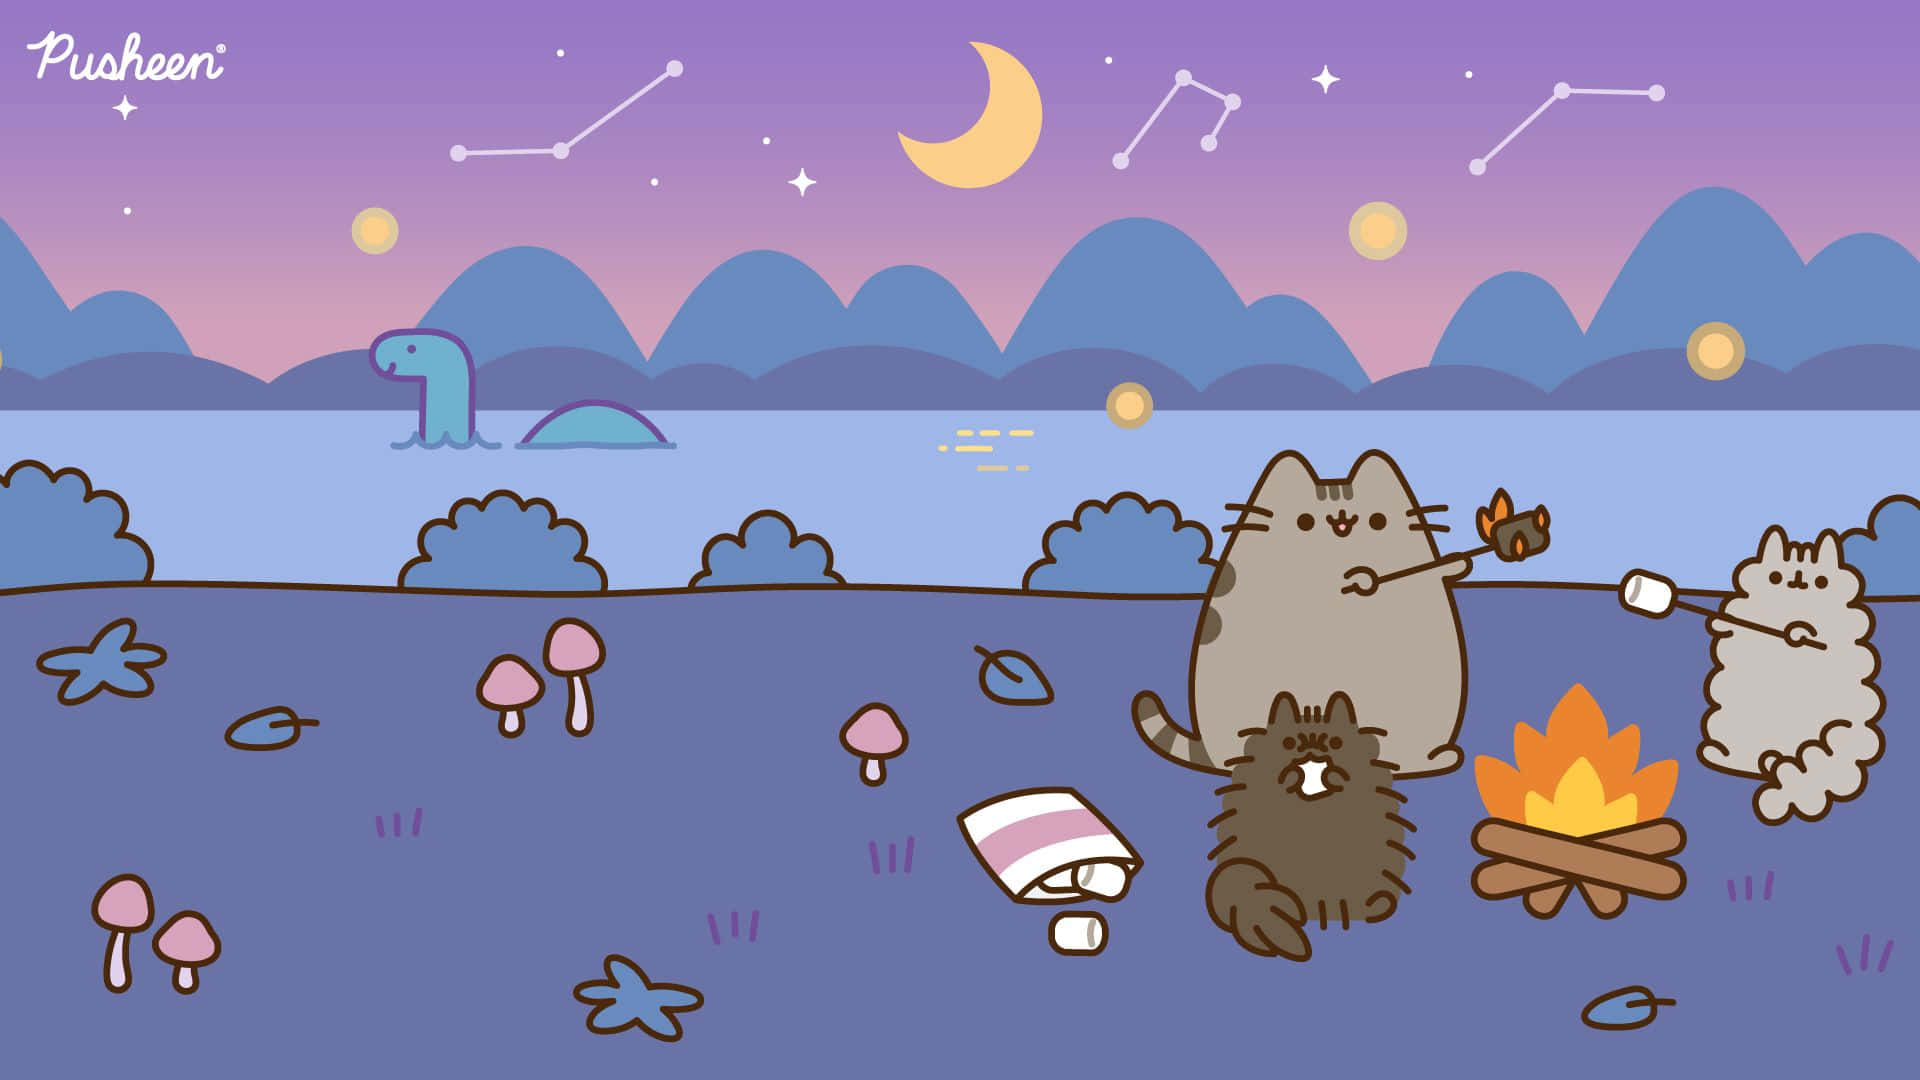 Get your paws on the cutest computer with Pusheen PC! Wallpaper